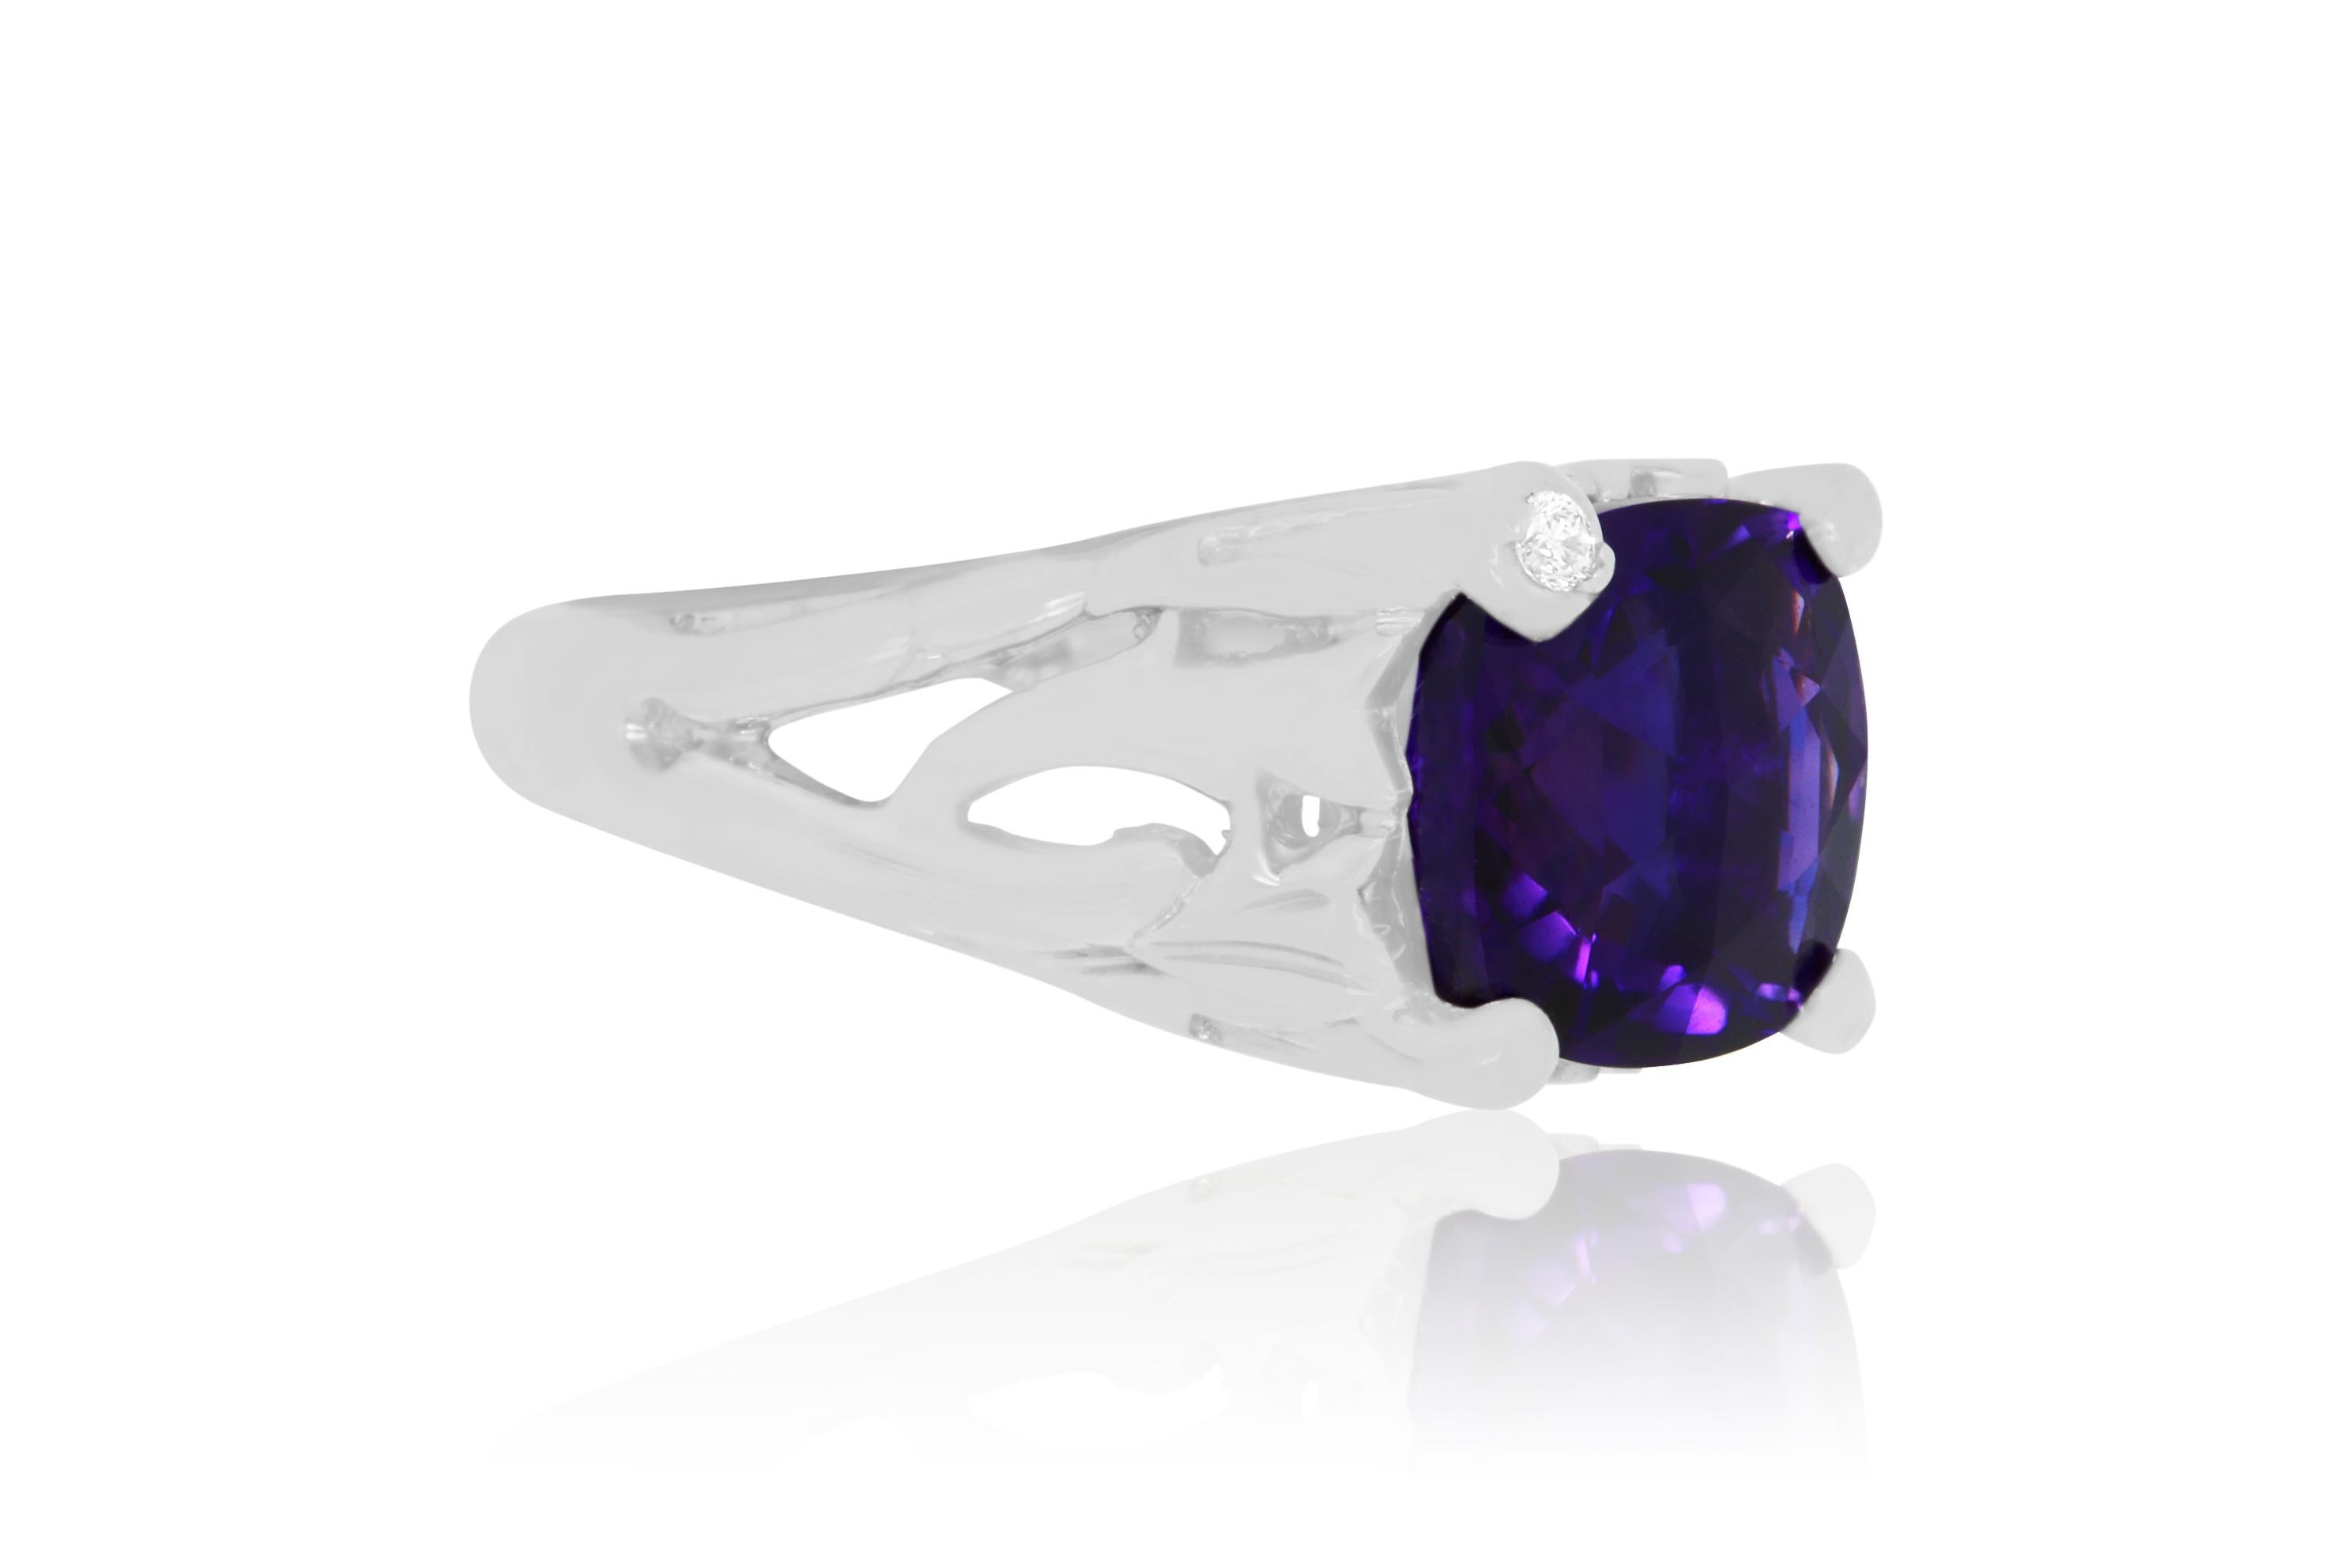 This beautiful and bold piece features a 4.60 Carat Amethyst stone encased in 14K white gold and adorned with a single brilliant round white diamond.

Material: 14k White Gold 
Stone Details: 1 Cushion Cut Amethyst at 4.60 Carats
Mounting Stone